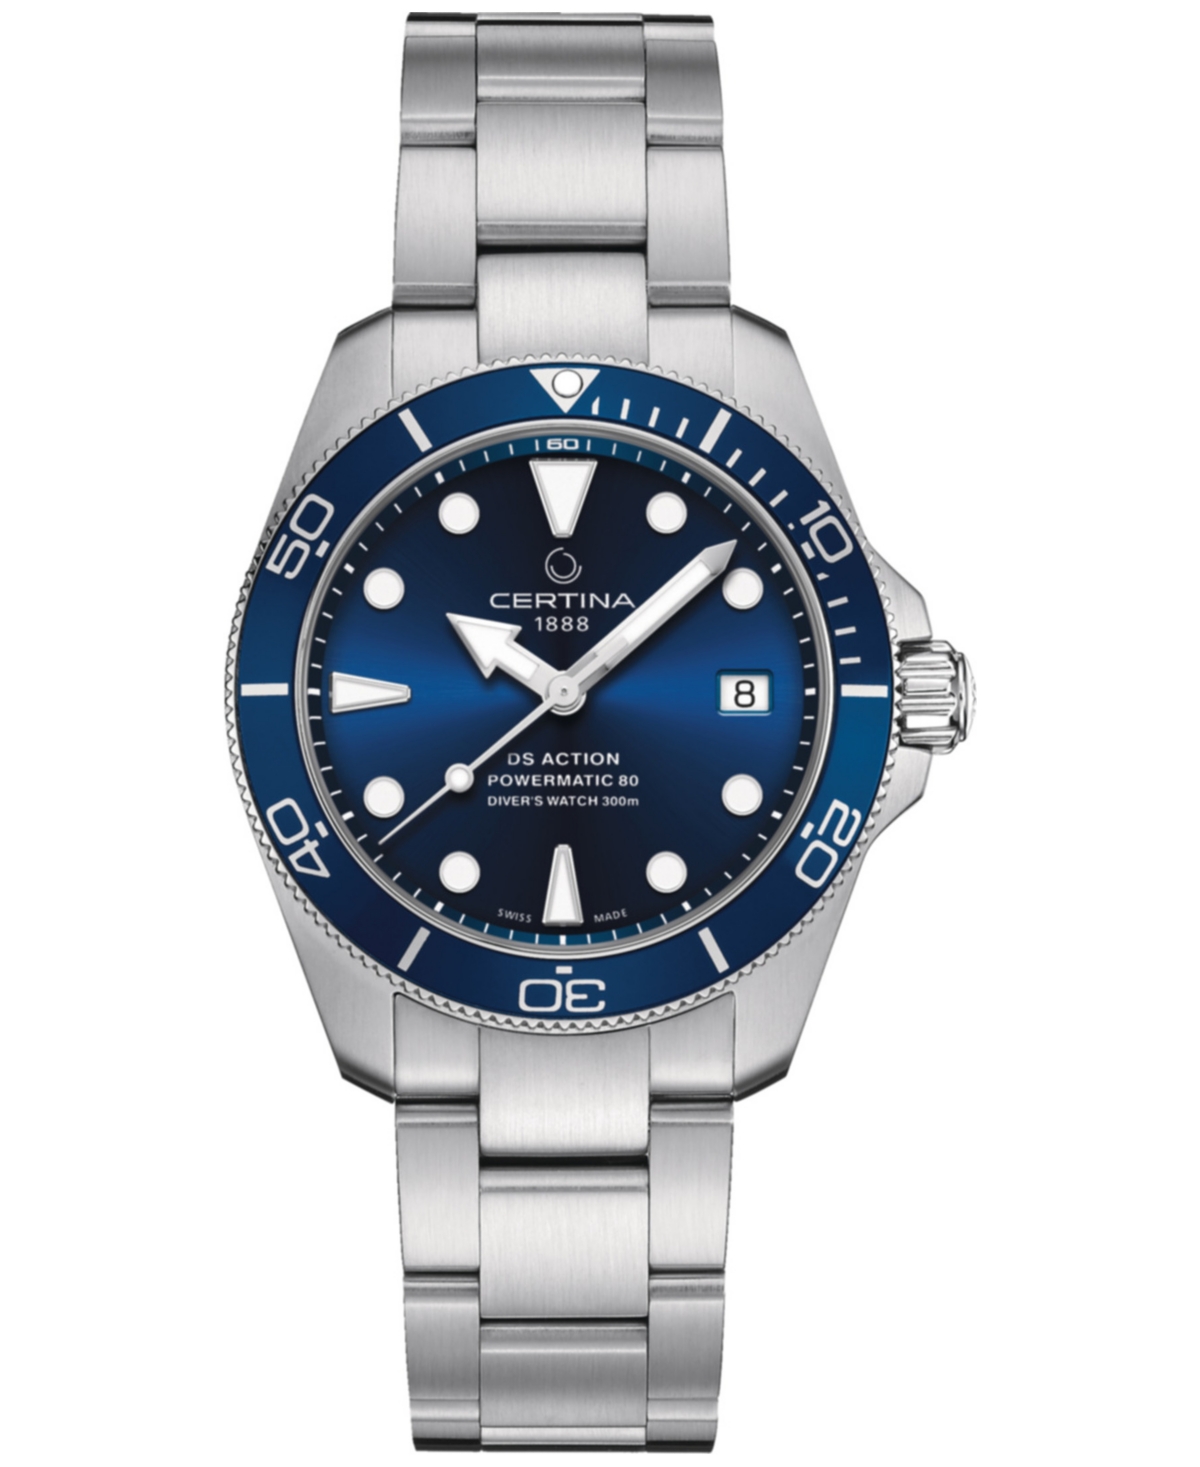 Unisex Swiss Automatic Ds Action Diver Stainless Steel Bracelet Watch 38mm - Blue